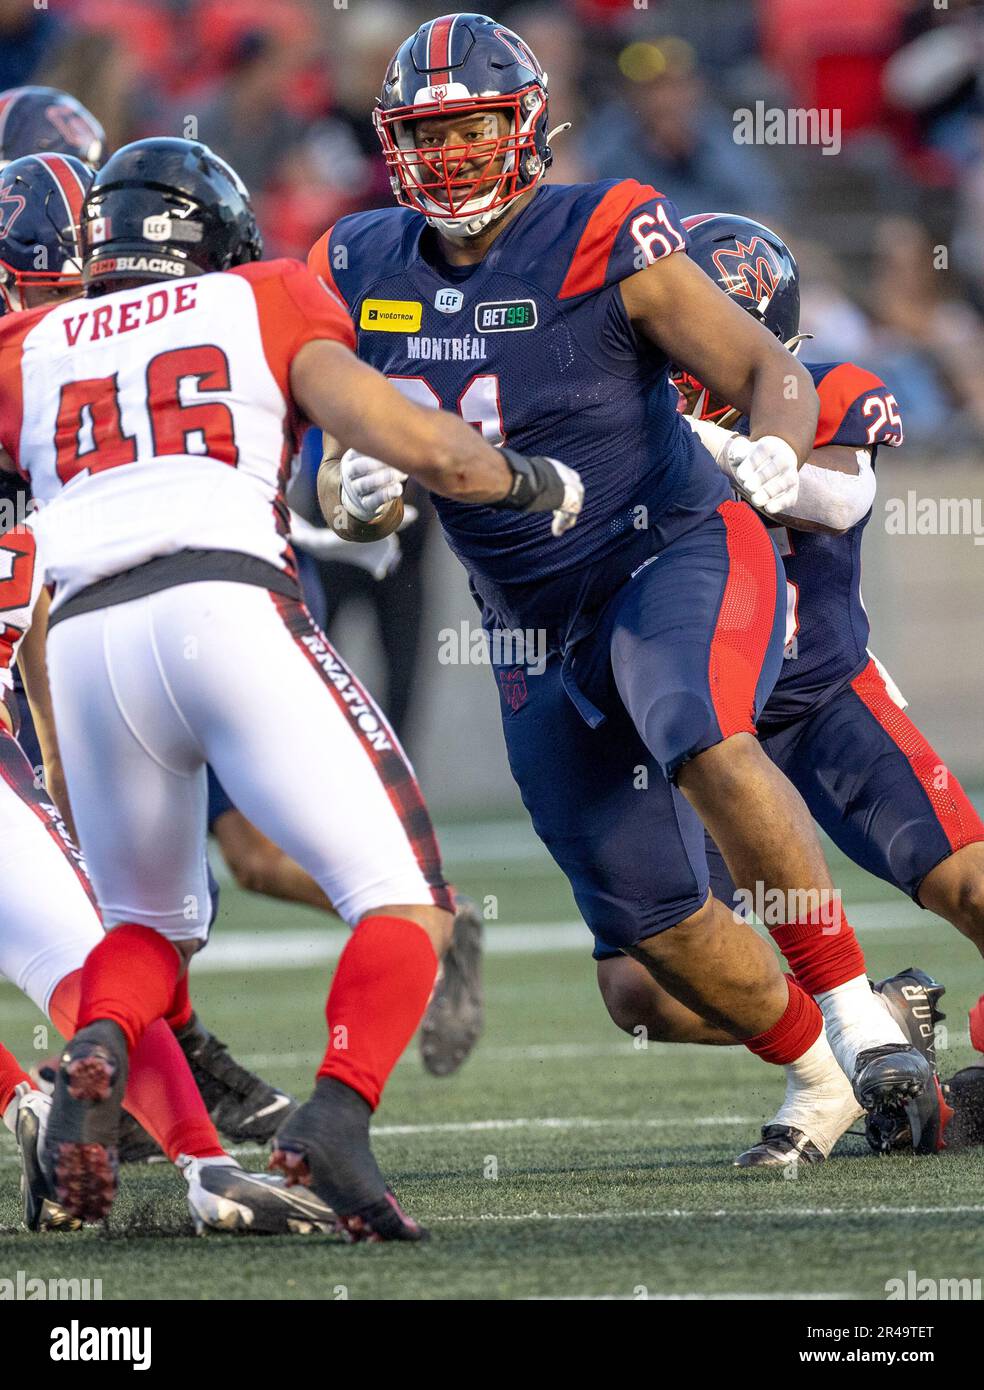 Ottawa, Canada. 26 May 2023.  Jamar McGloster (61) of the Montreal Alouettes in the Canadian Football League preseason game between the Ottawa Redblacks and the visiting Montreal Alouettes. The Alouettes won the game 22-21. Copyright 2023 Sean Burges / Mundo Sport Images / Alamy Live news Stock Photo